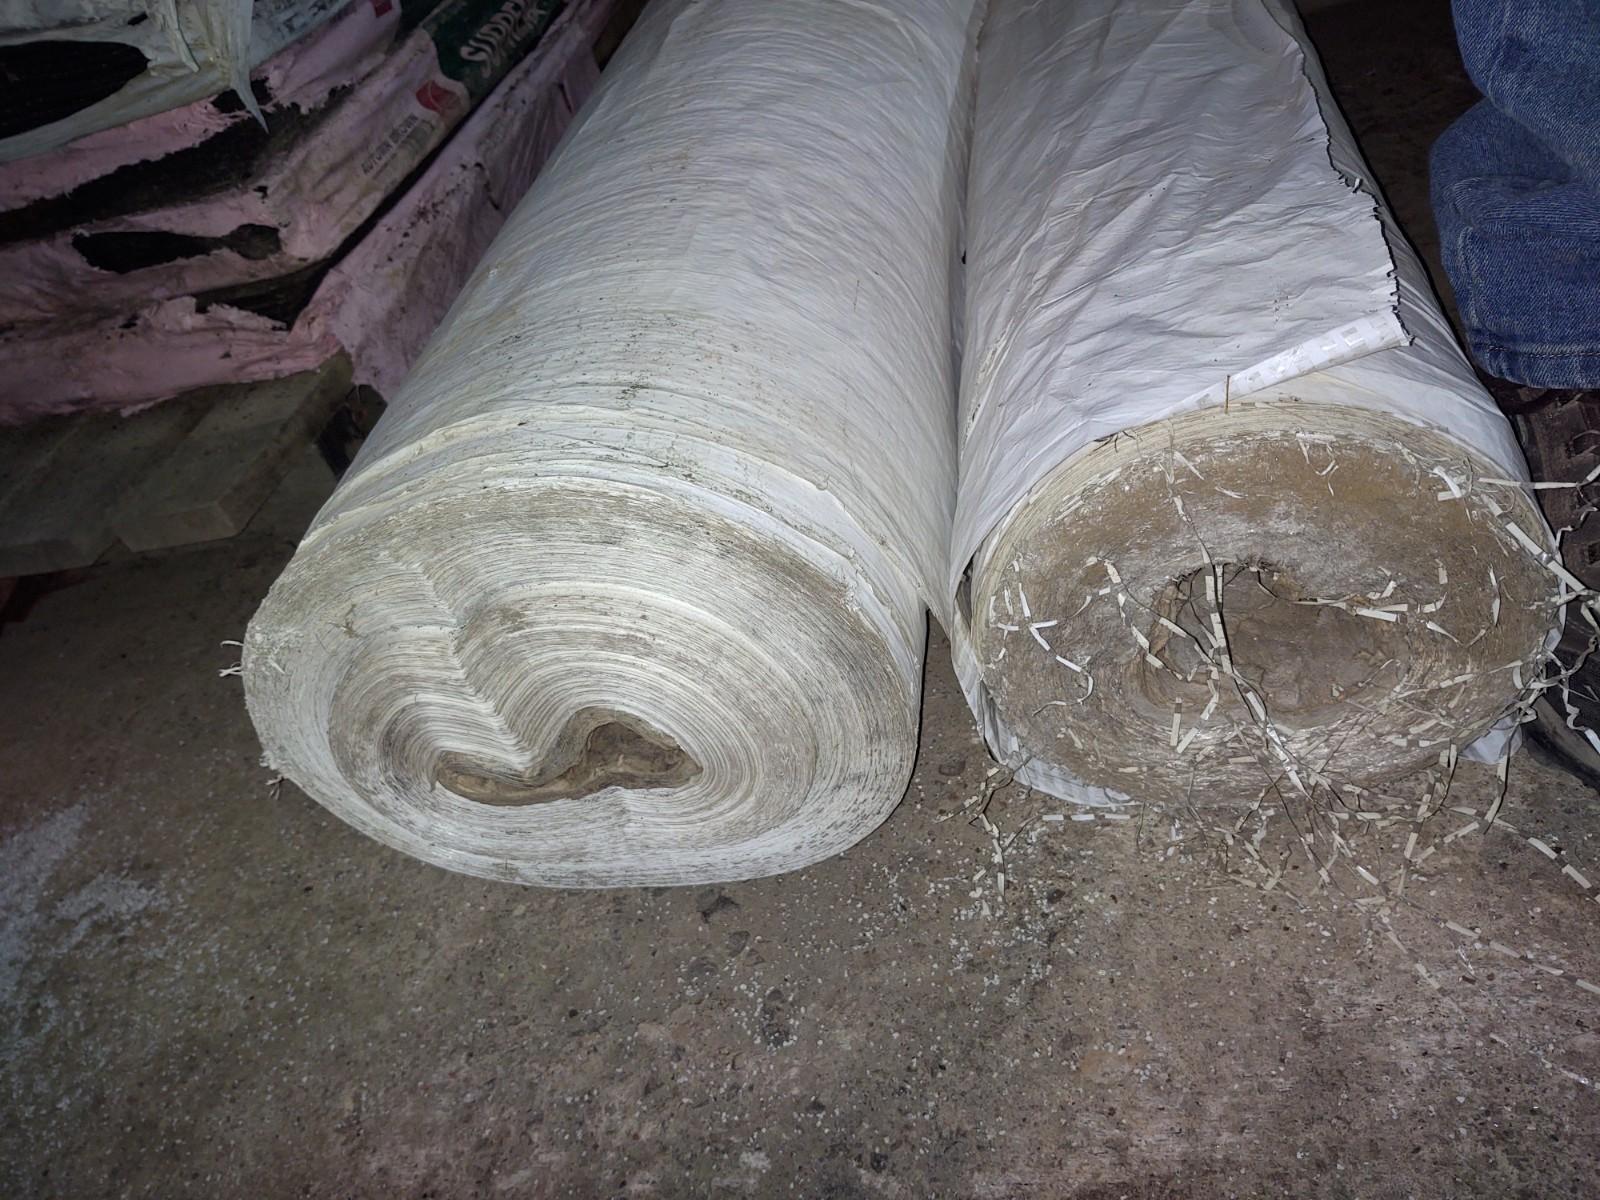 2 ROLLS OF TYVEK STYLE HOUSE WRAP (5 ft wide) - PICK UP ONLY